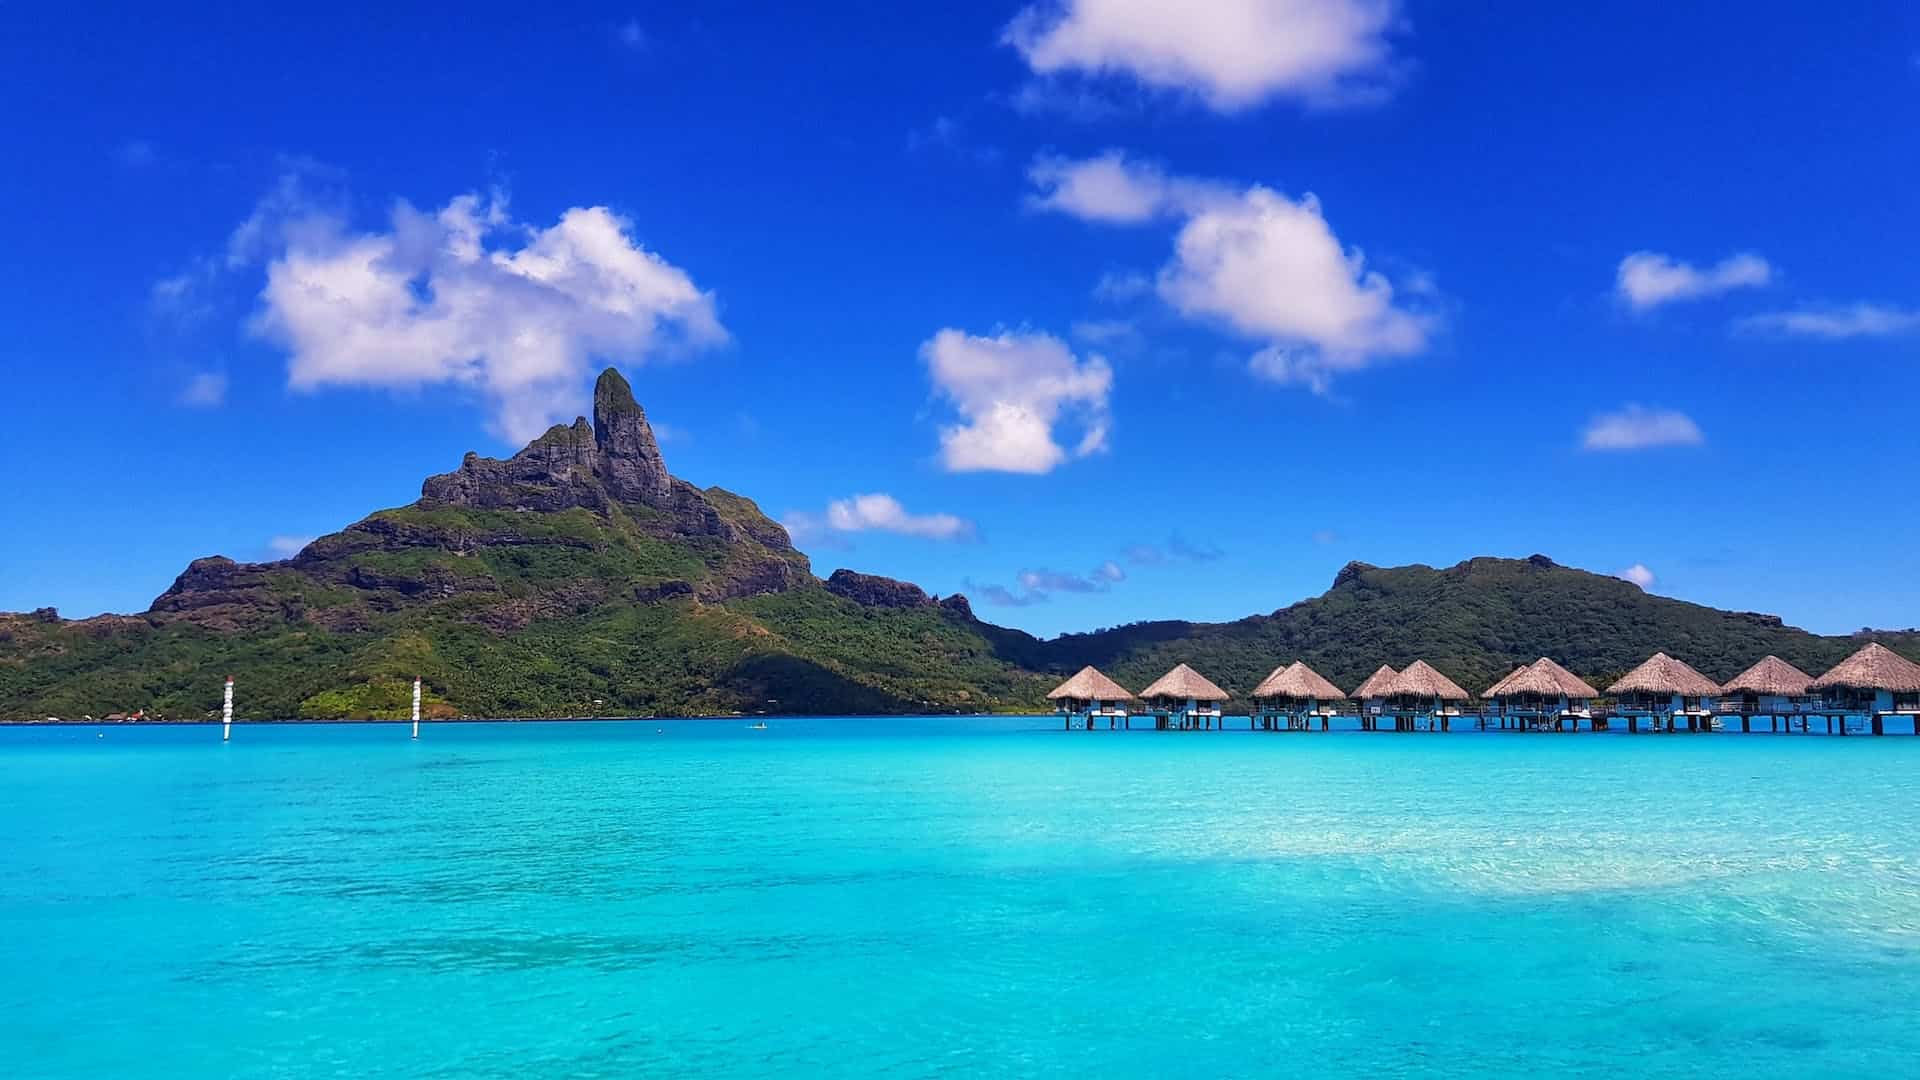 Huts in the water in Bora Bora surrounded by the ocean with mountains in the background.